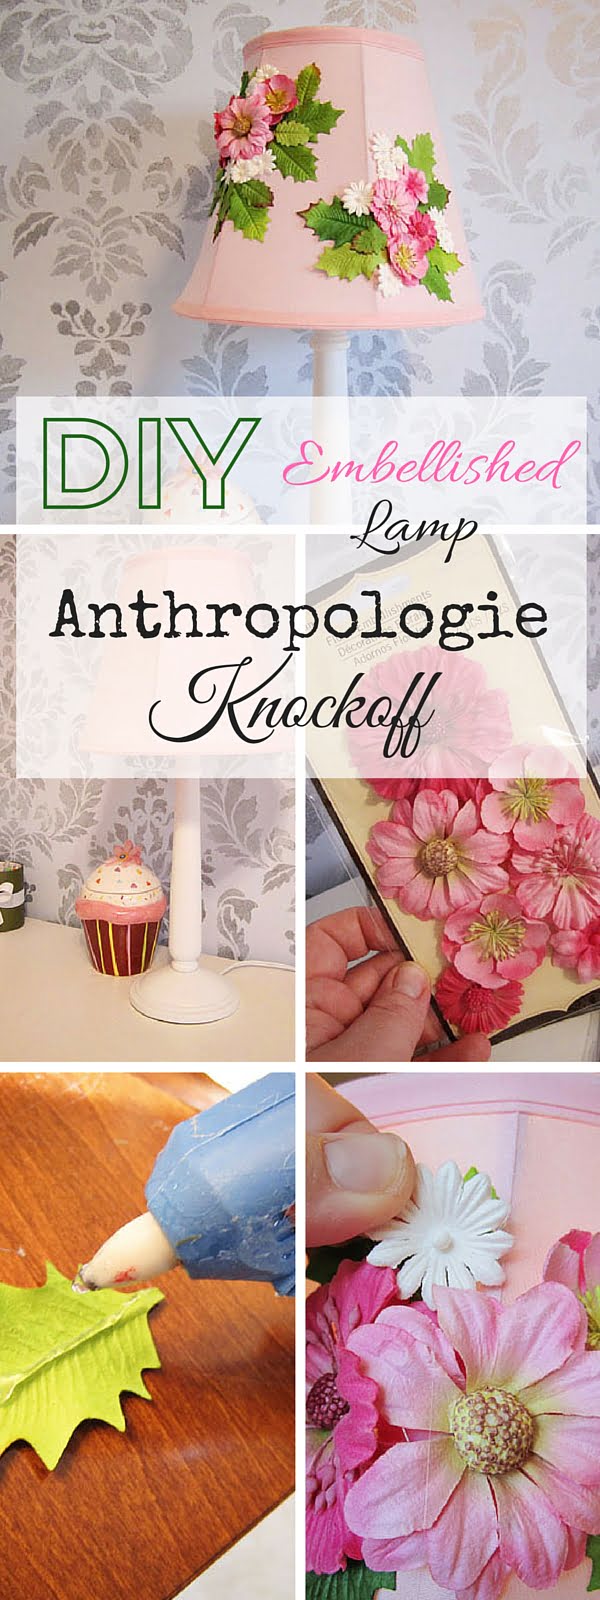 Check out the tutorial:  Anthropologie Embellished Lamp Knockoff  